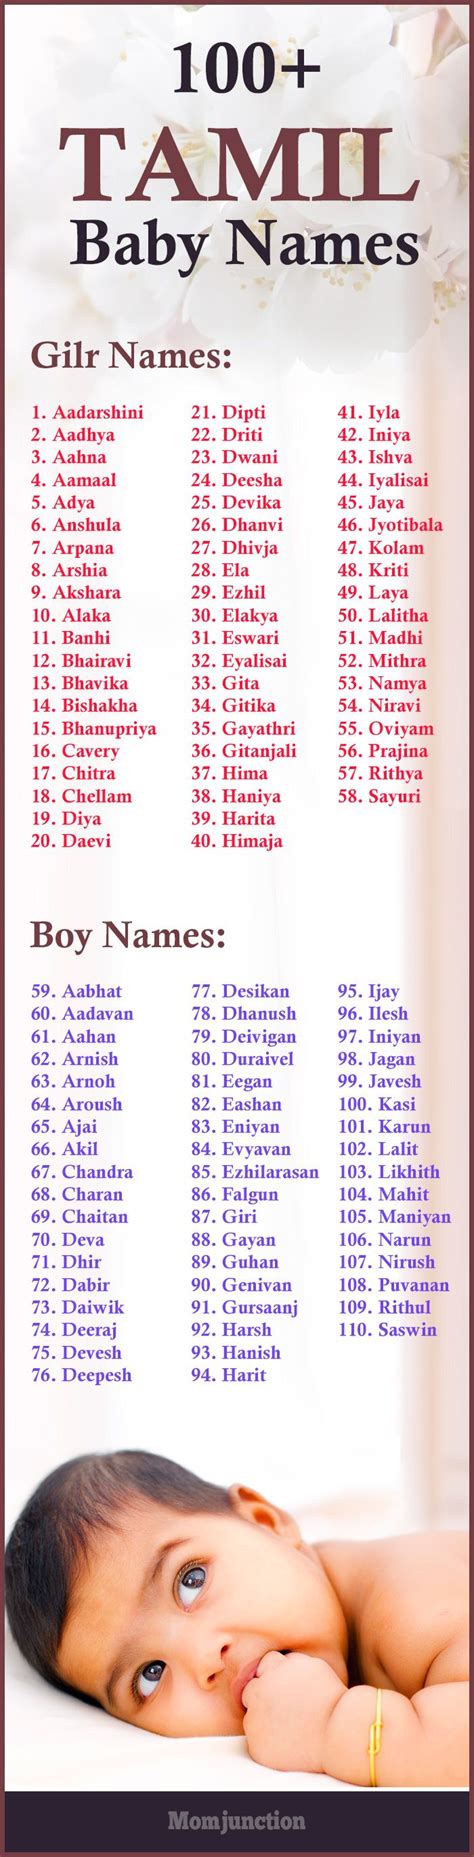 135 Modern Tamil Baby Names For Girls And Boys Tamil